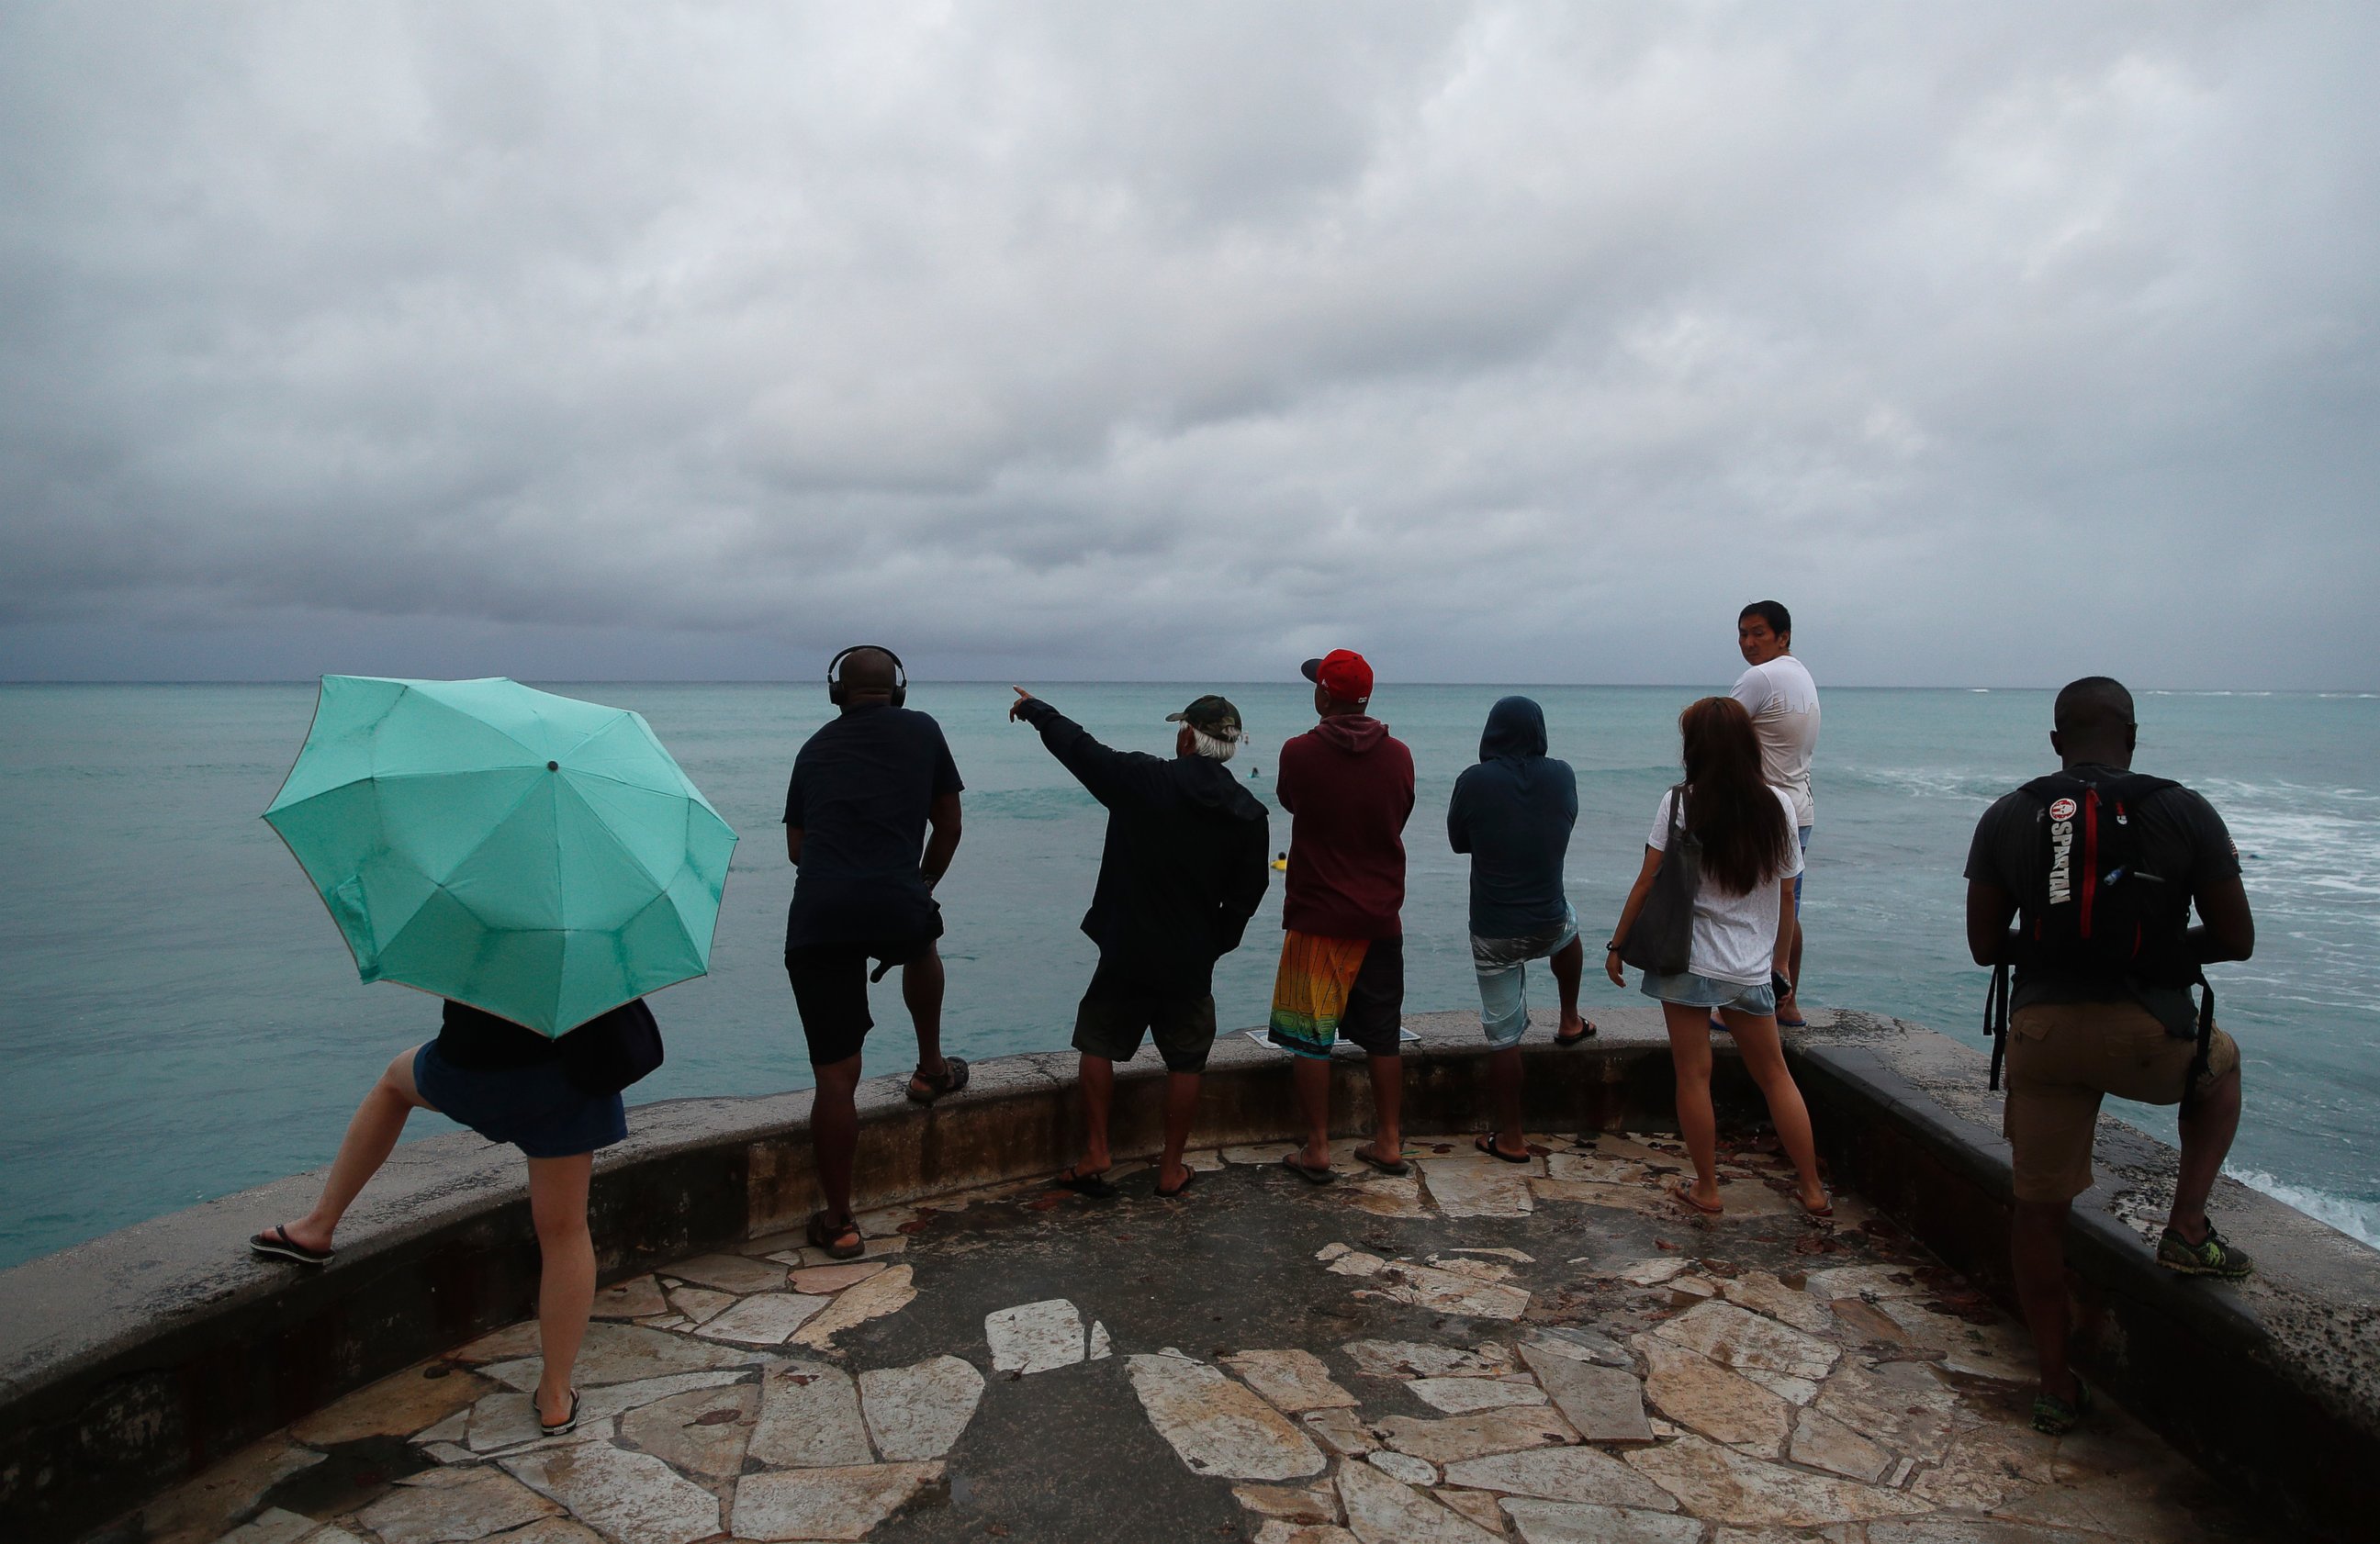 People look out over the ocean along Waikiki Beach in a light rain from Tropical Storm Lane, Saturday, Aug. 25, 2018, in Honolulu..